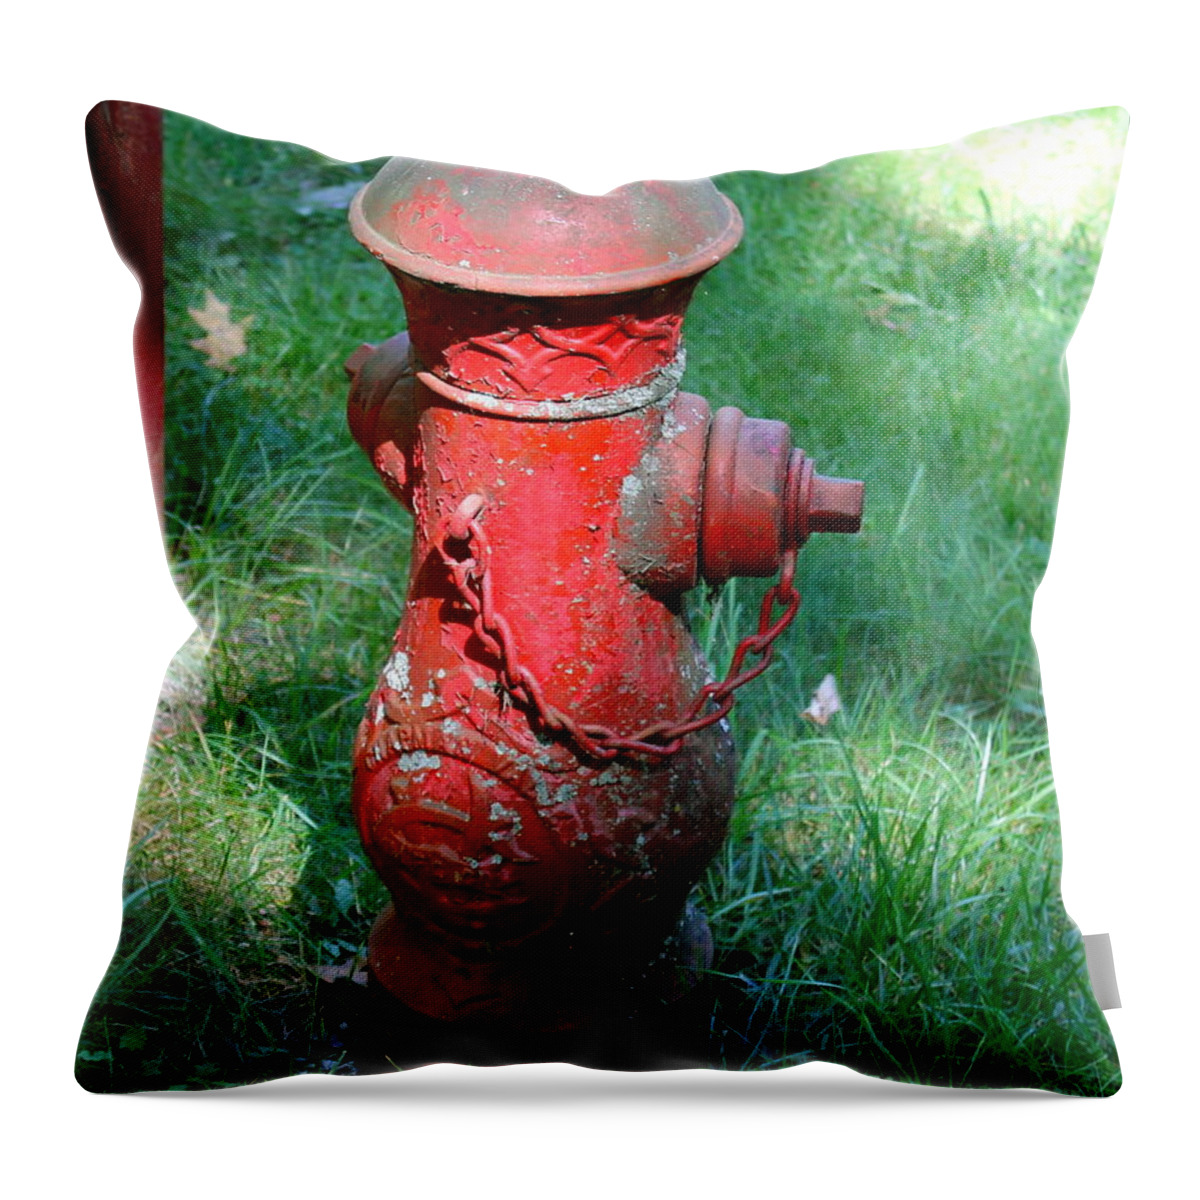 Fire Hydrant Throw Pillow featuring the photograph Old Fire Hydrant by Pamela Walrath